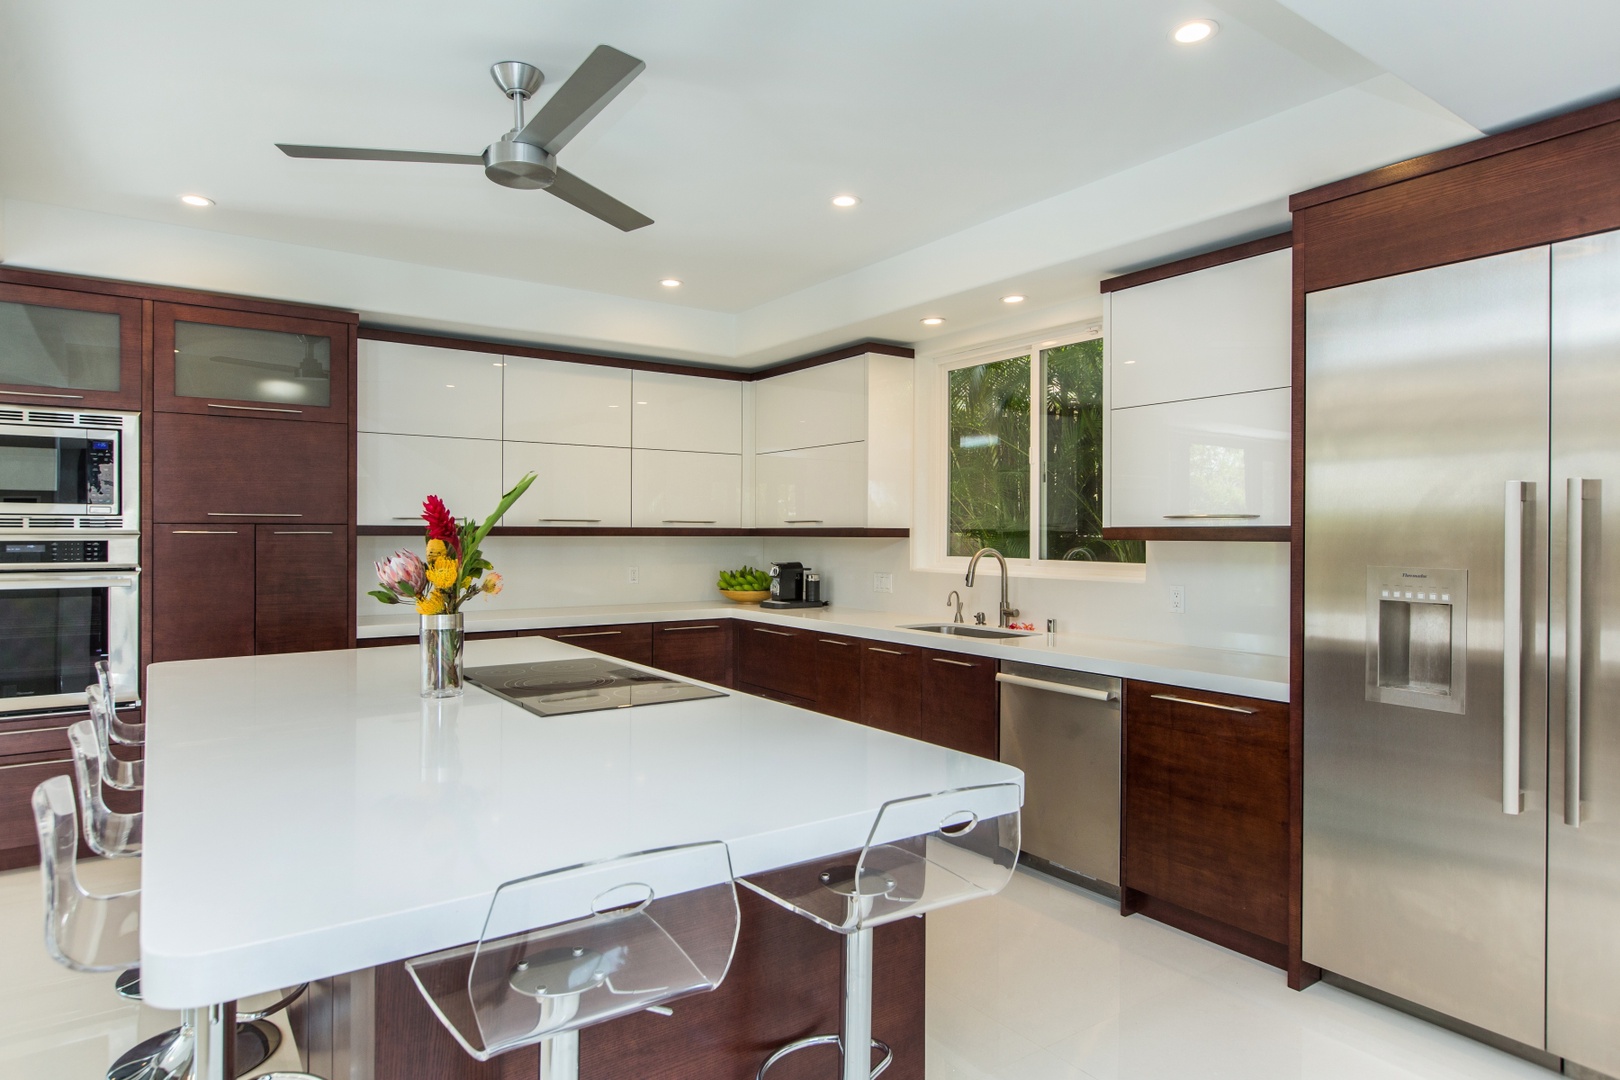 Honolulu Vacation Rentals, Le Reve at Diamond Head* - State of the art kitchen!